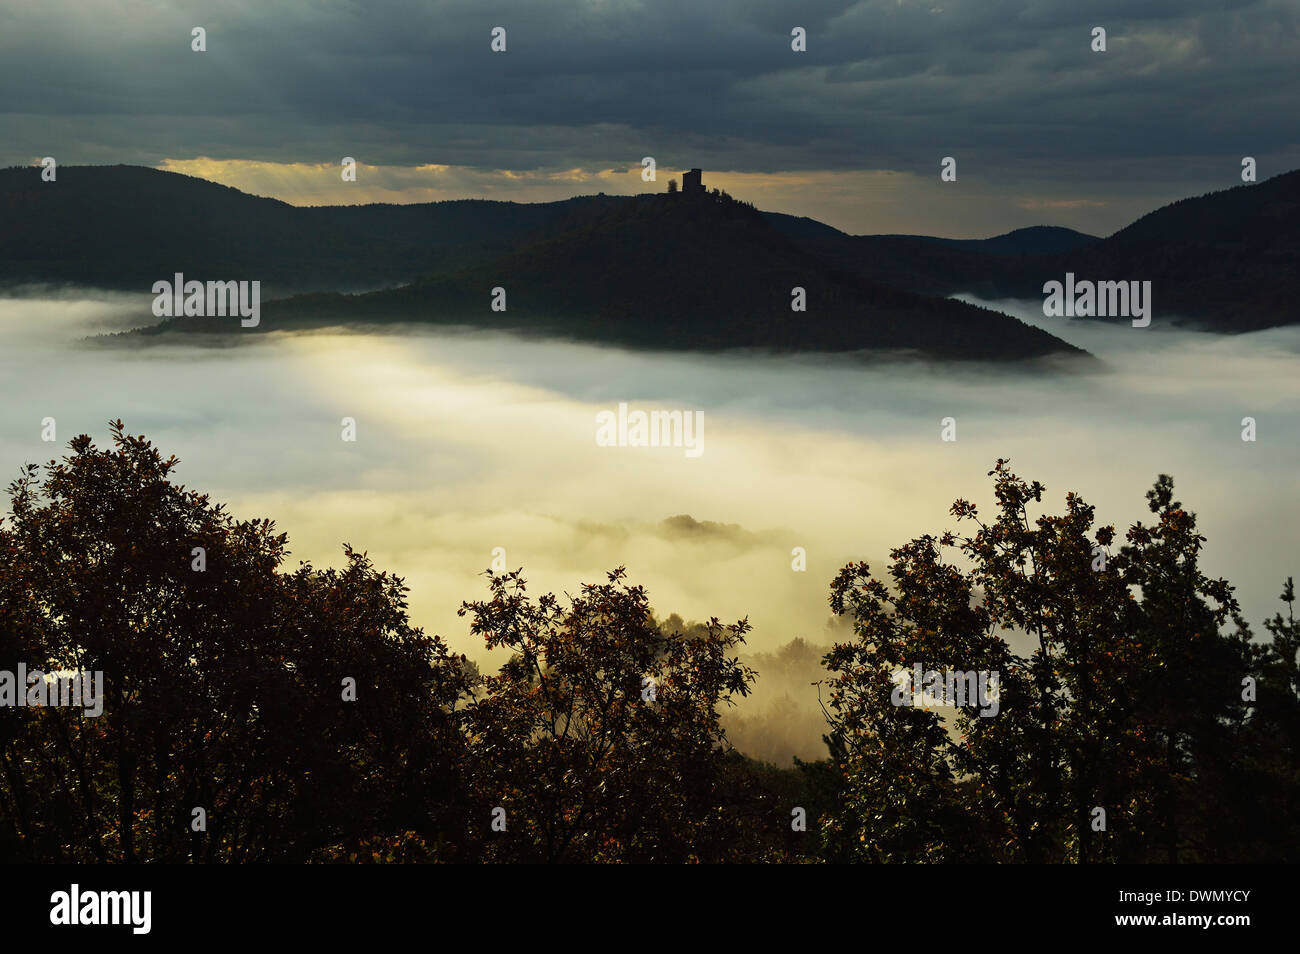 View of Castle Trifels, Palatinate Forest, near Annweiler, Rhineland-Palatinate, Germany, Europe Stock Photo